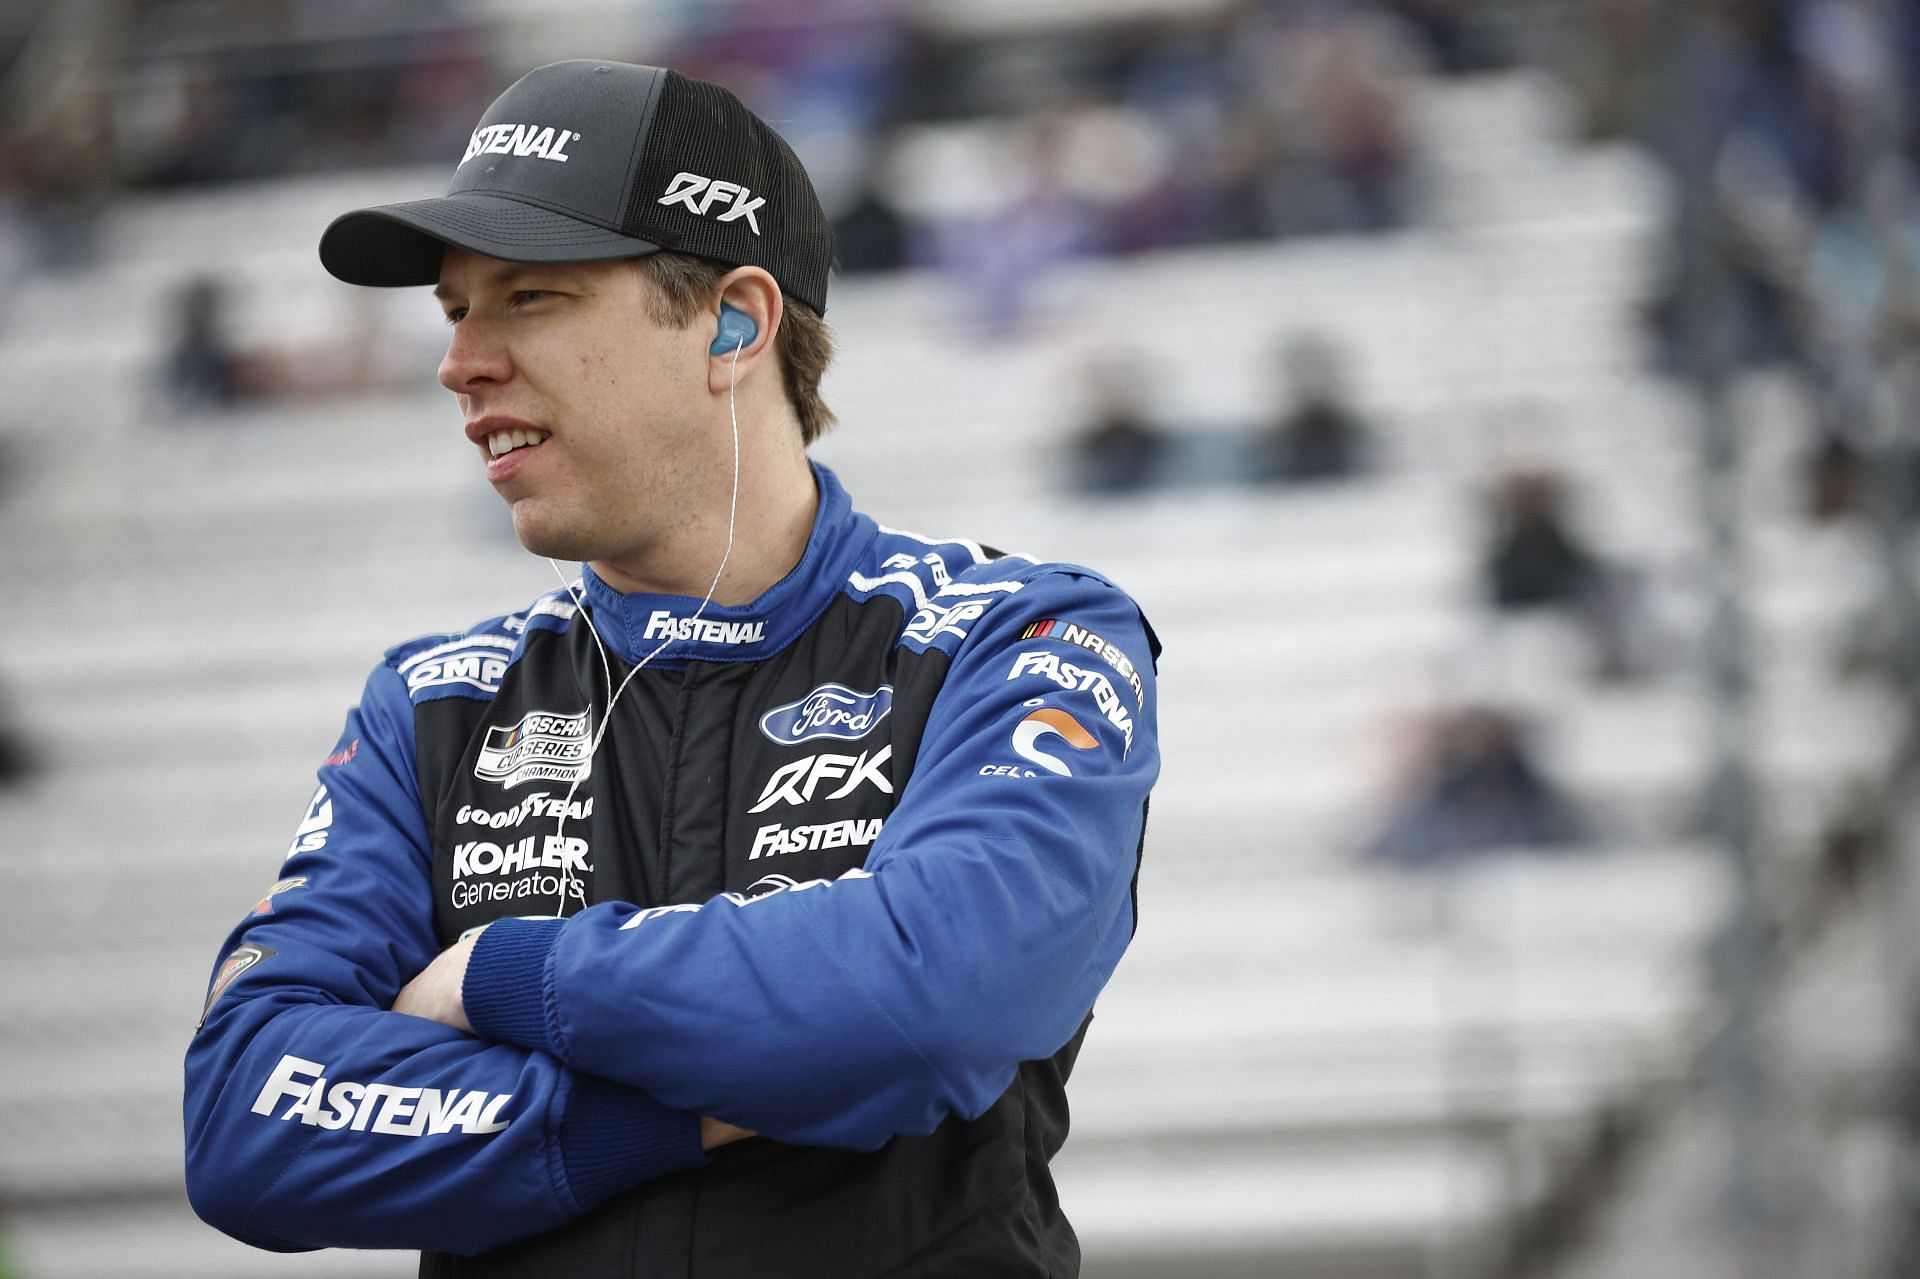 Brad Keselowski looks on during qualifying for the NASCAR Cup Series Blue-Emu Maximum Pain Relief 400 at Martinsville Speedway (Photo by Jared C. Tilton/Getty Images)